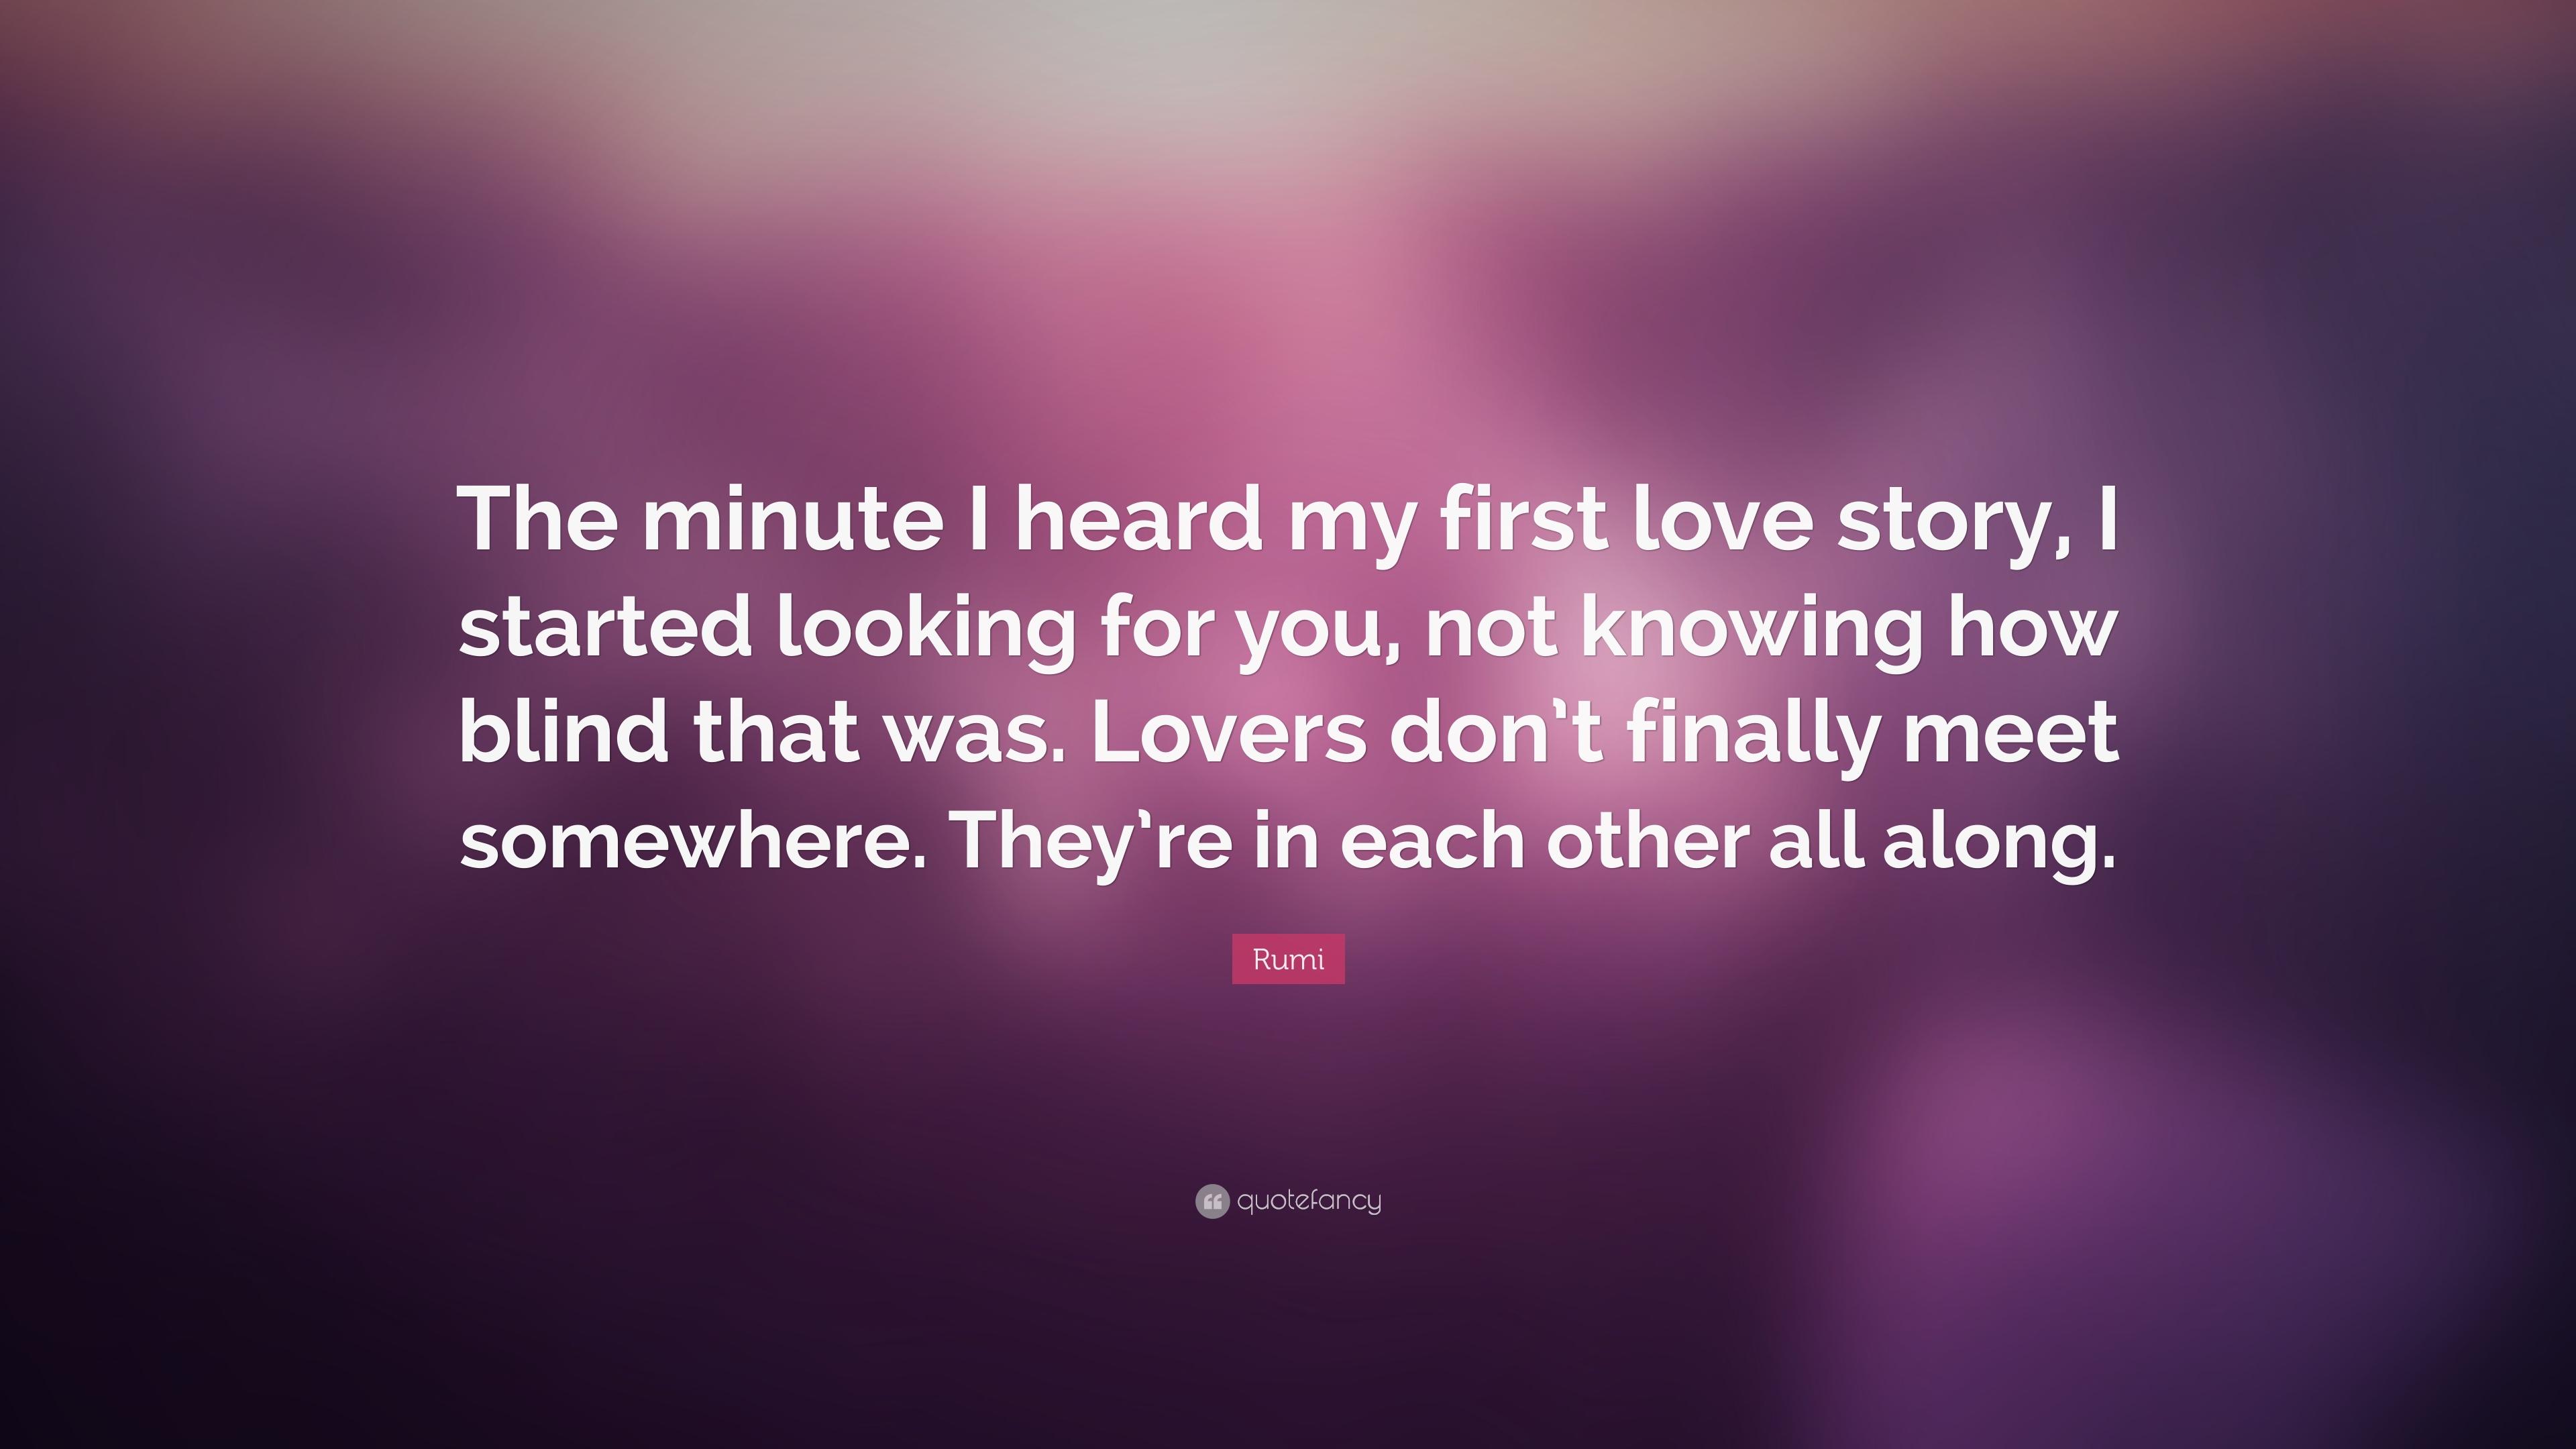 Rumi Quote: “The minute I heard my first love story, I started